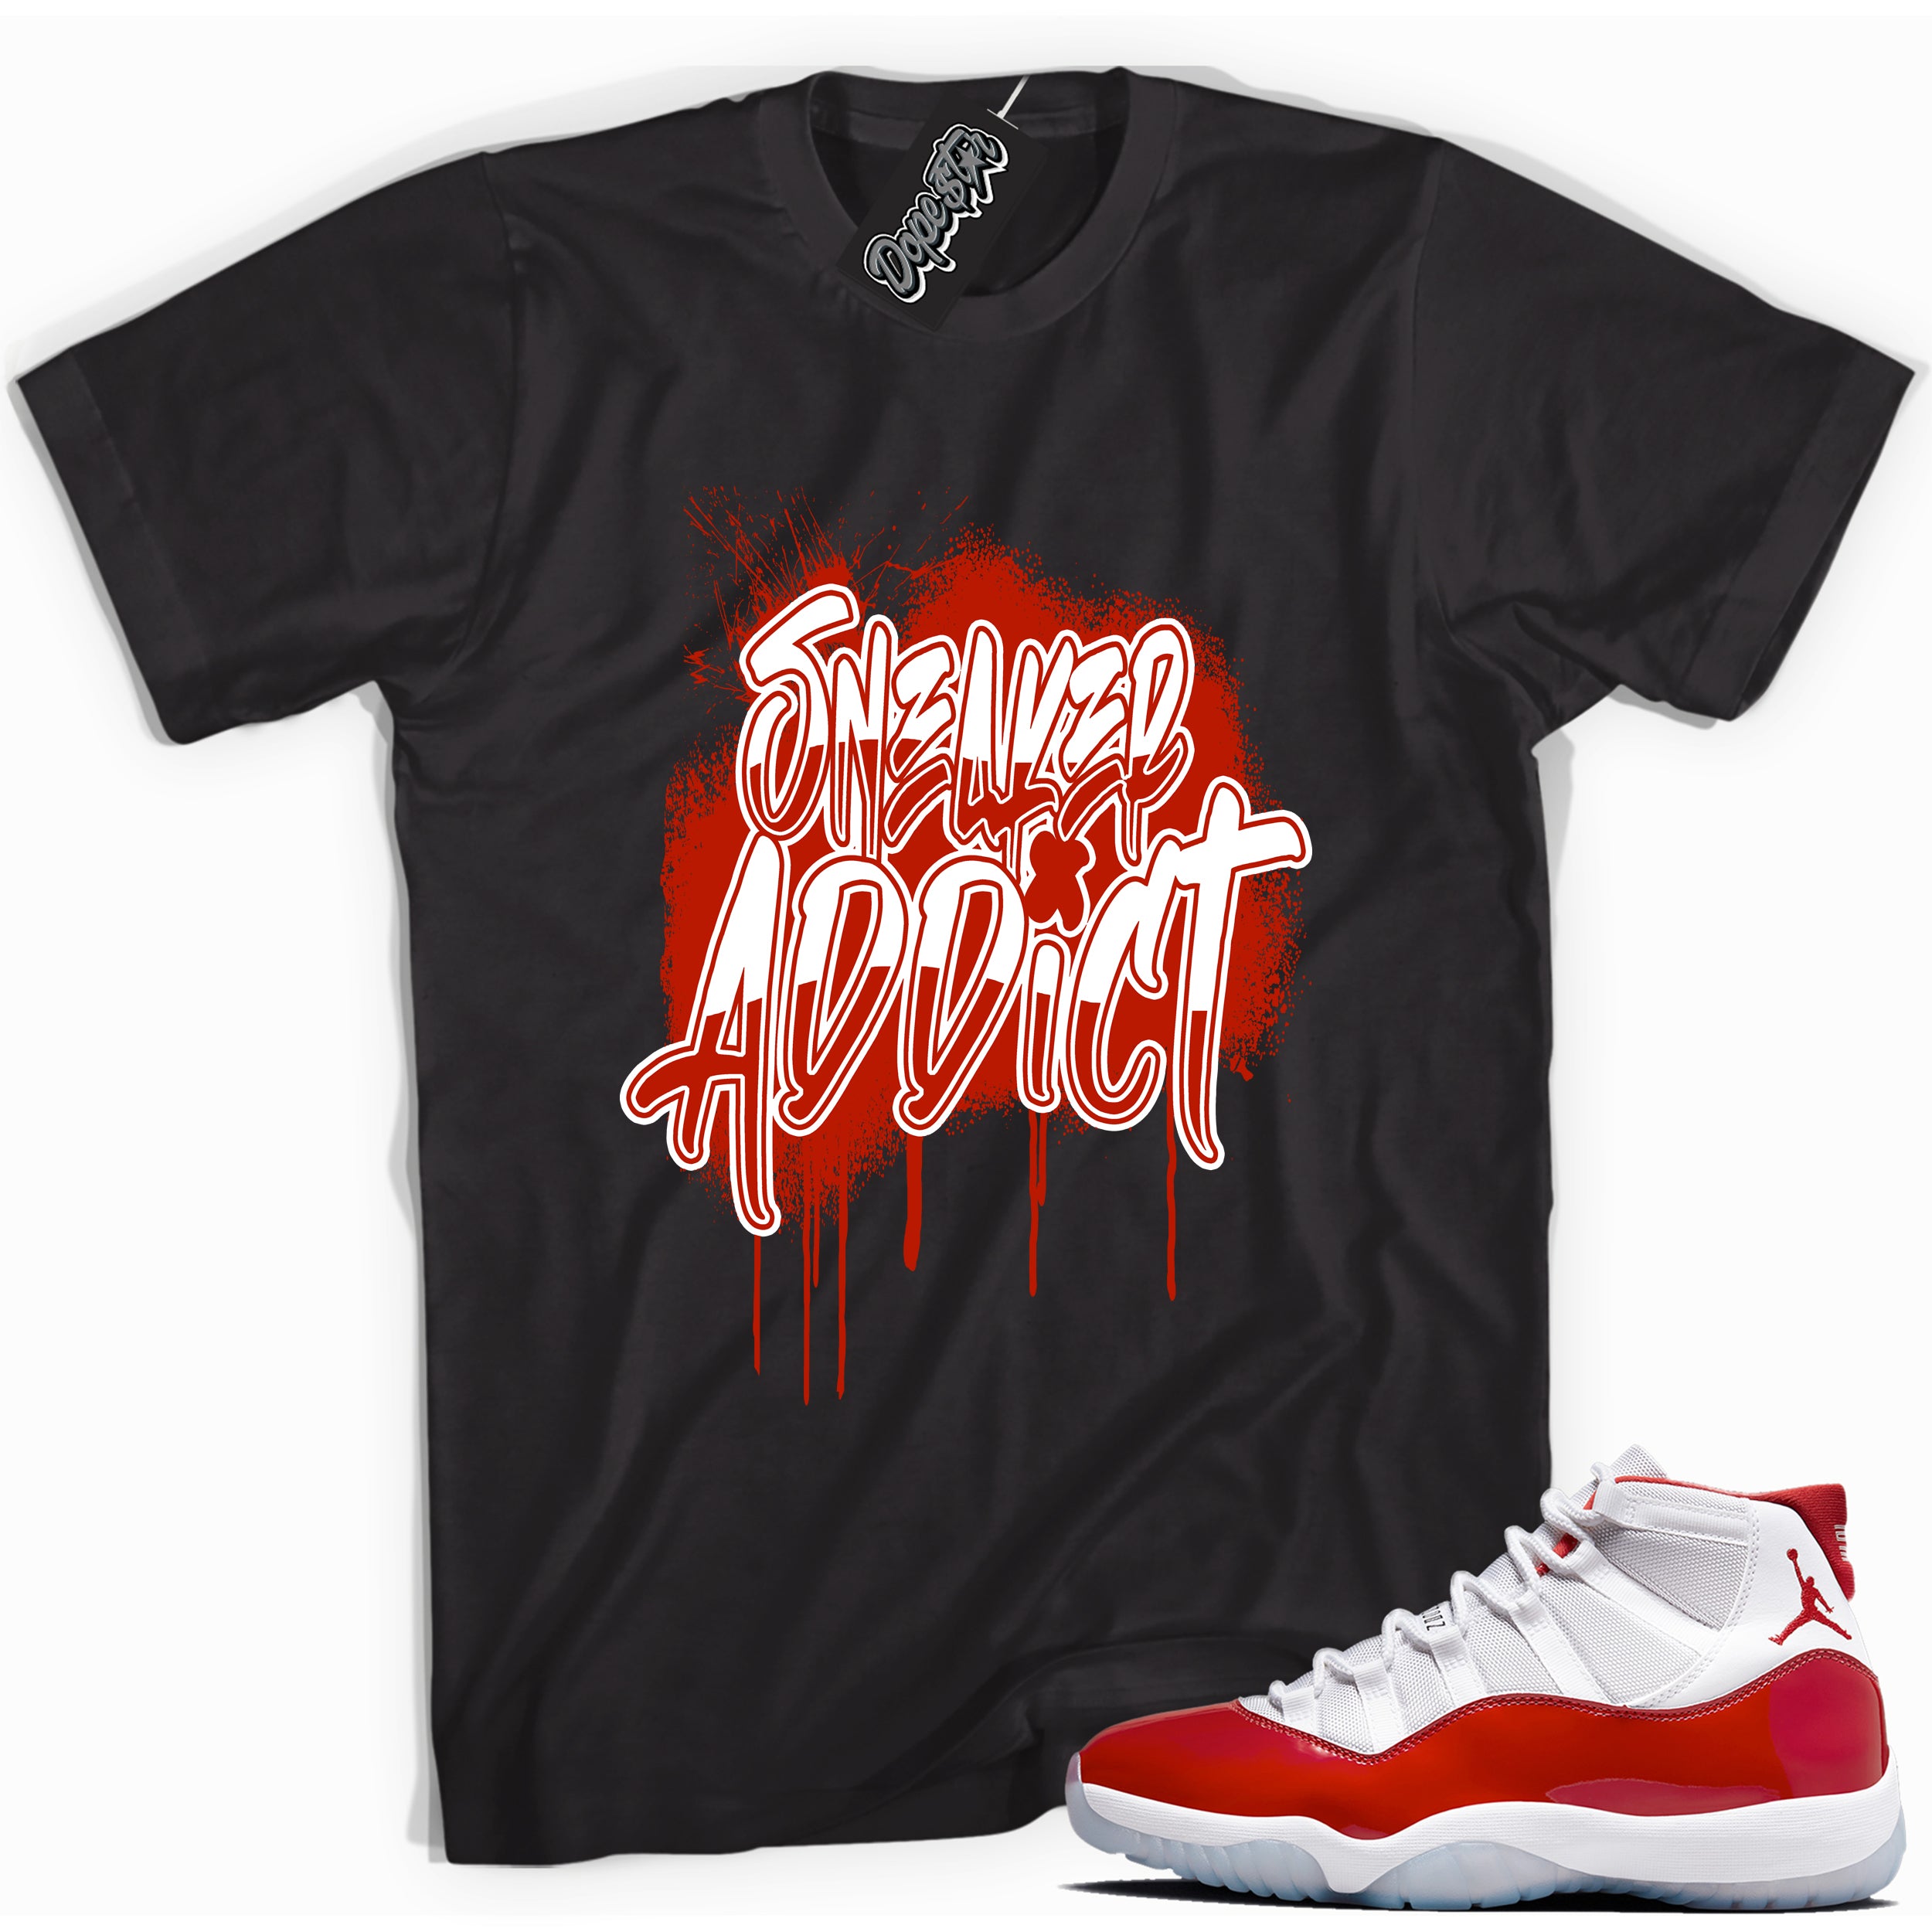 Cool Black graphic tee with “ Sneaker Addict  ” print, that perfectly matches CHERRY 11s  sneakers 